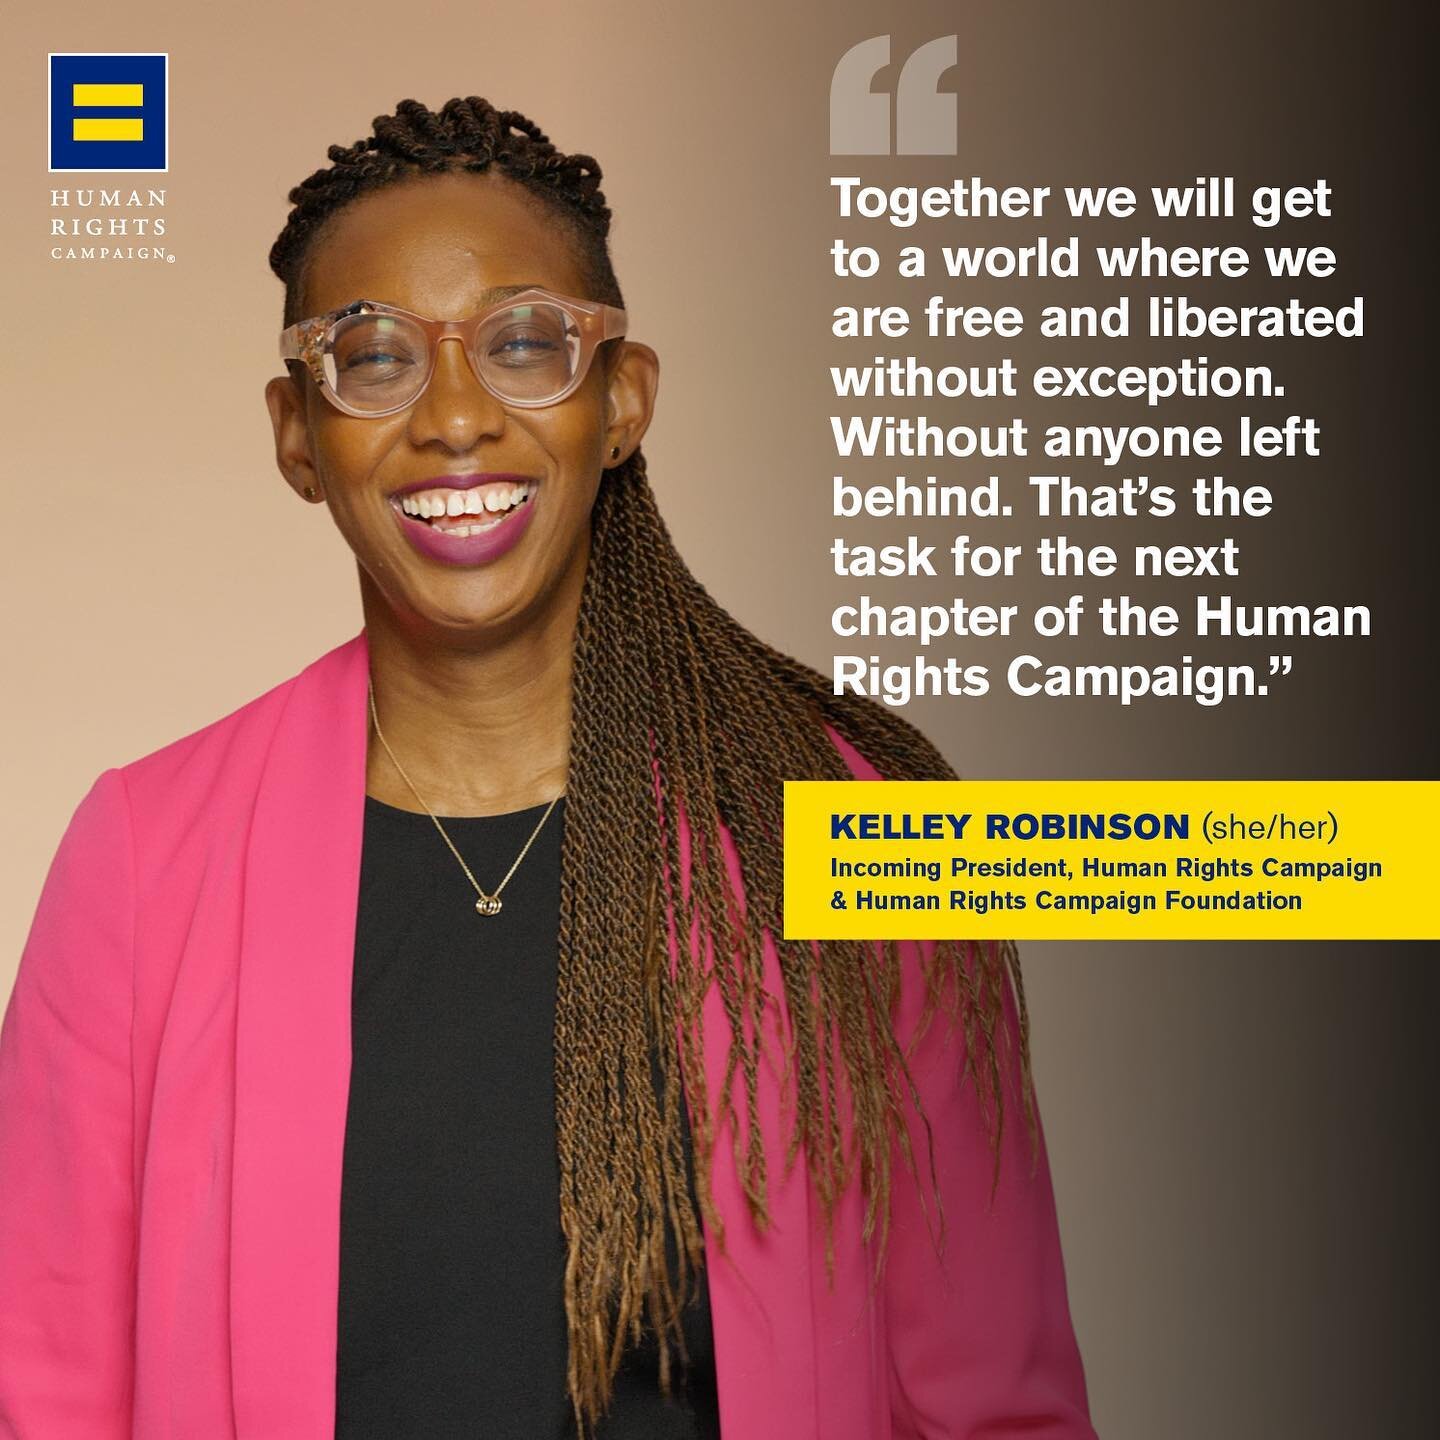 @KelleyJRobinson is a proven, progressive leader who&rsquo;s dedicated her life to fighting for the rights of marginalized communities everywhere. #CSWSConsulting is excited to see her take on this new role with the @humanrightscampaign and continue 